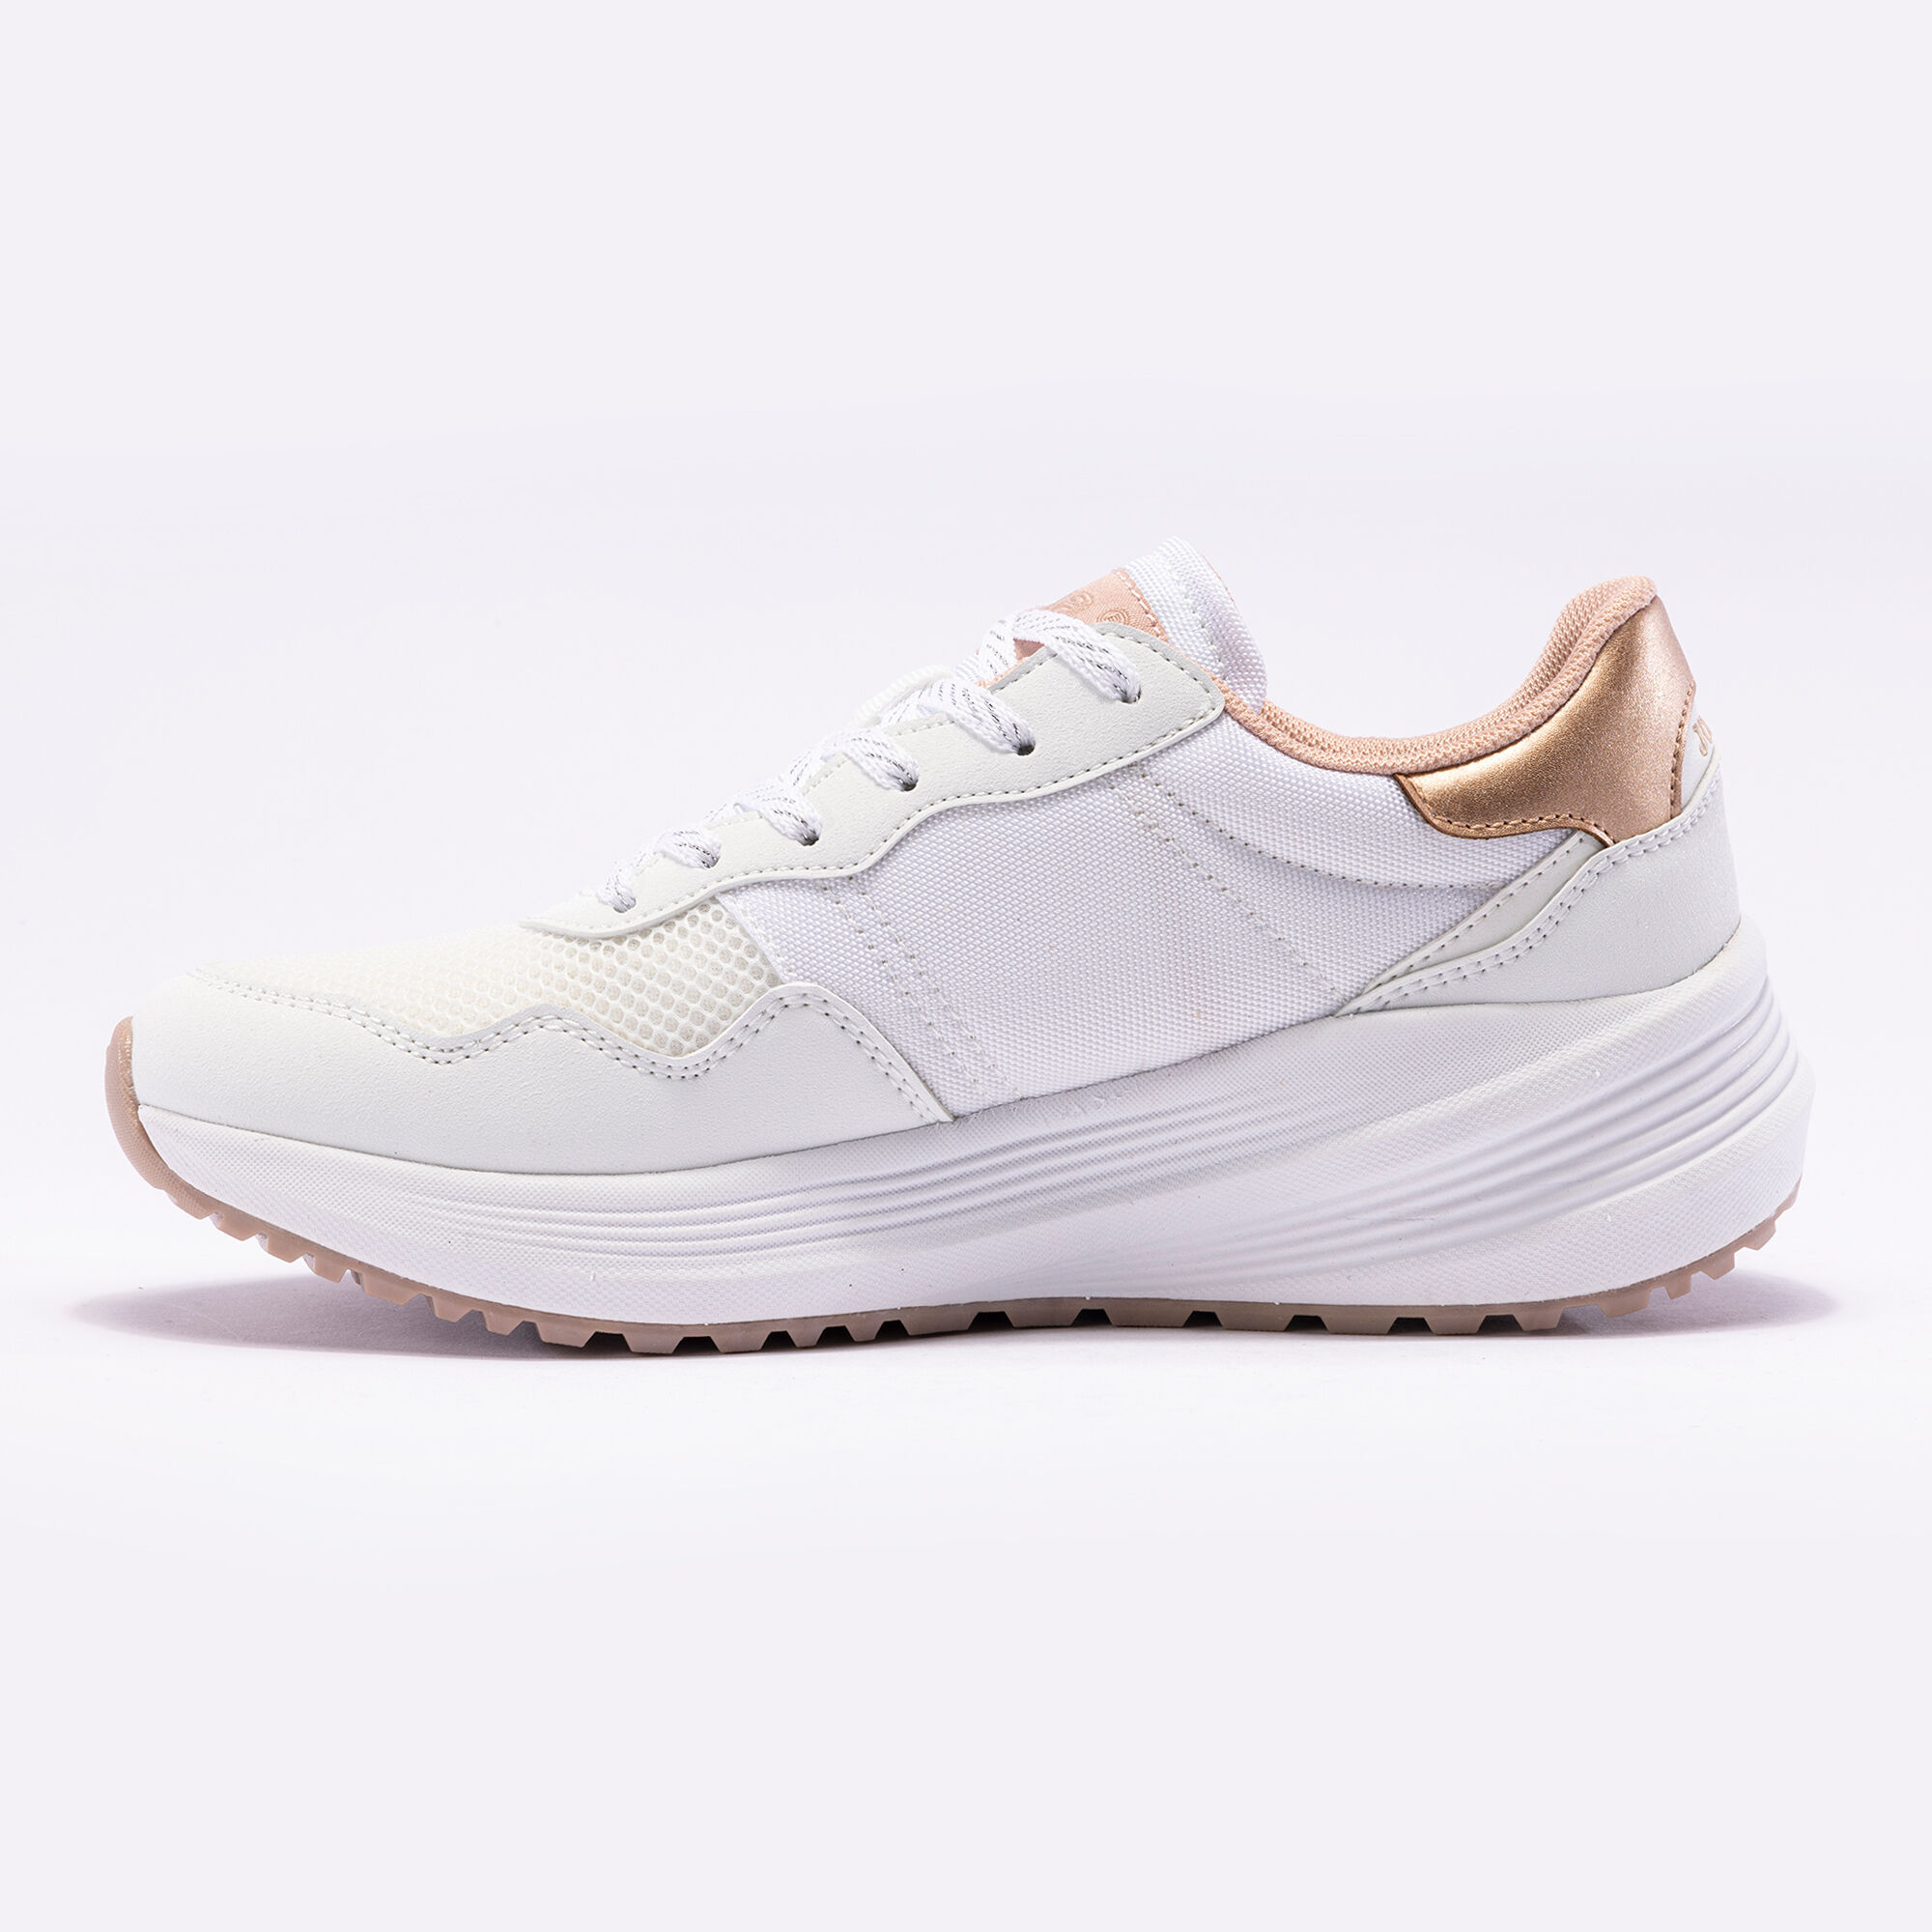 Chaussures casual C427 Lady 24 femme blanc